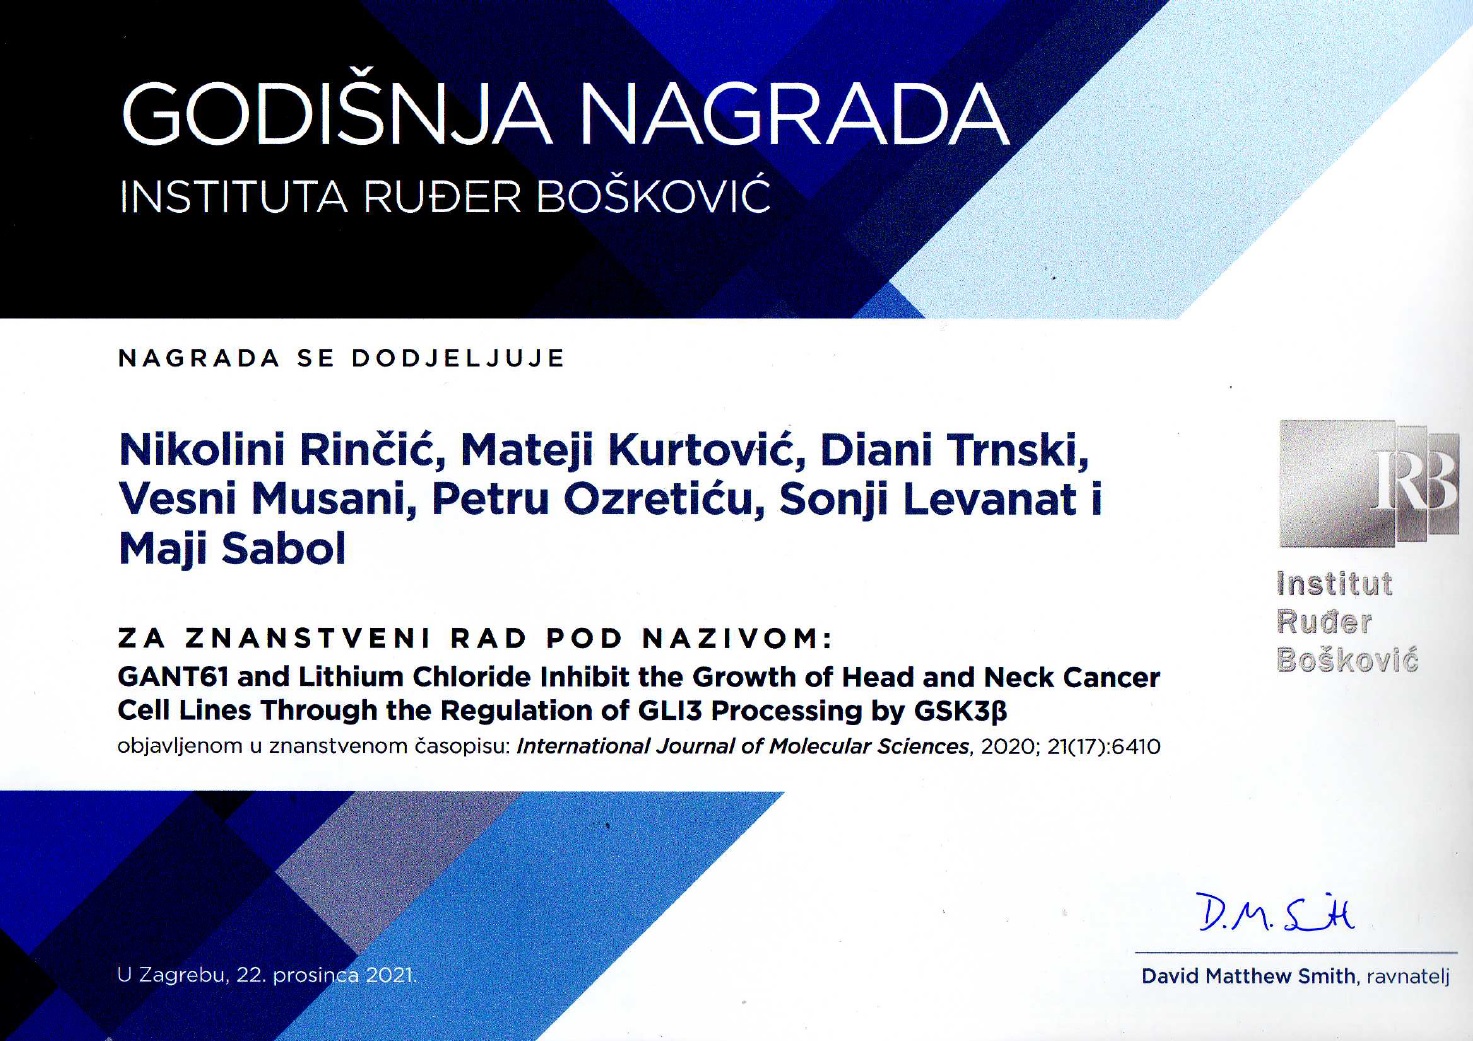 Annual Award of the Ruđer Bošković Institute for published scientific paper for 2021